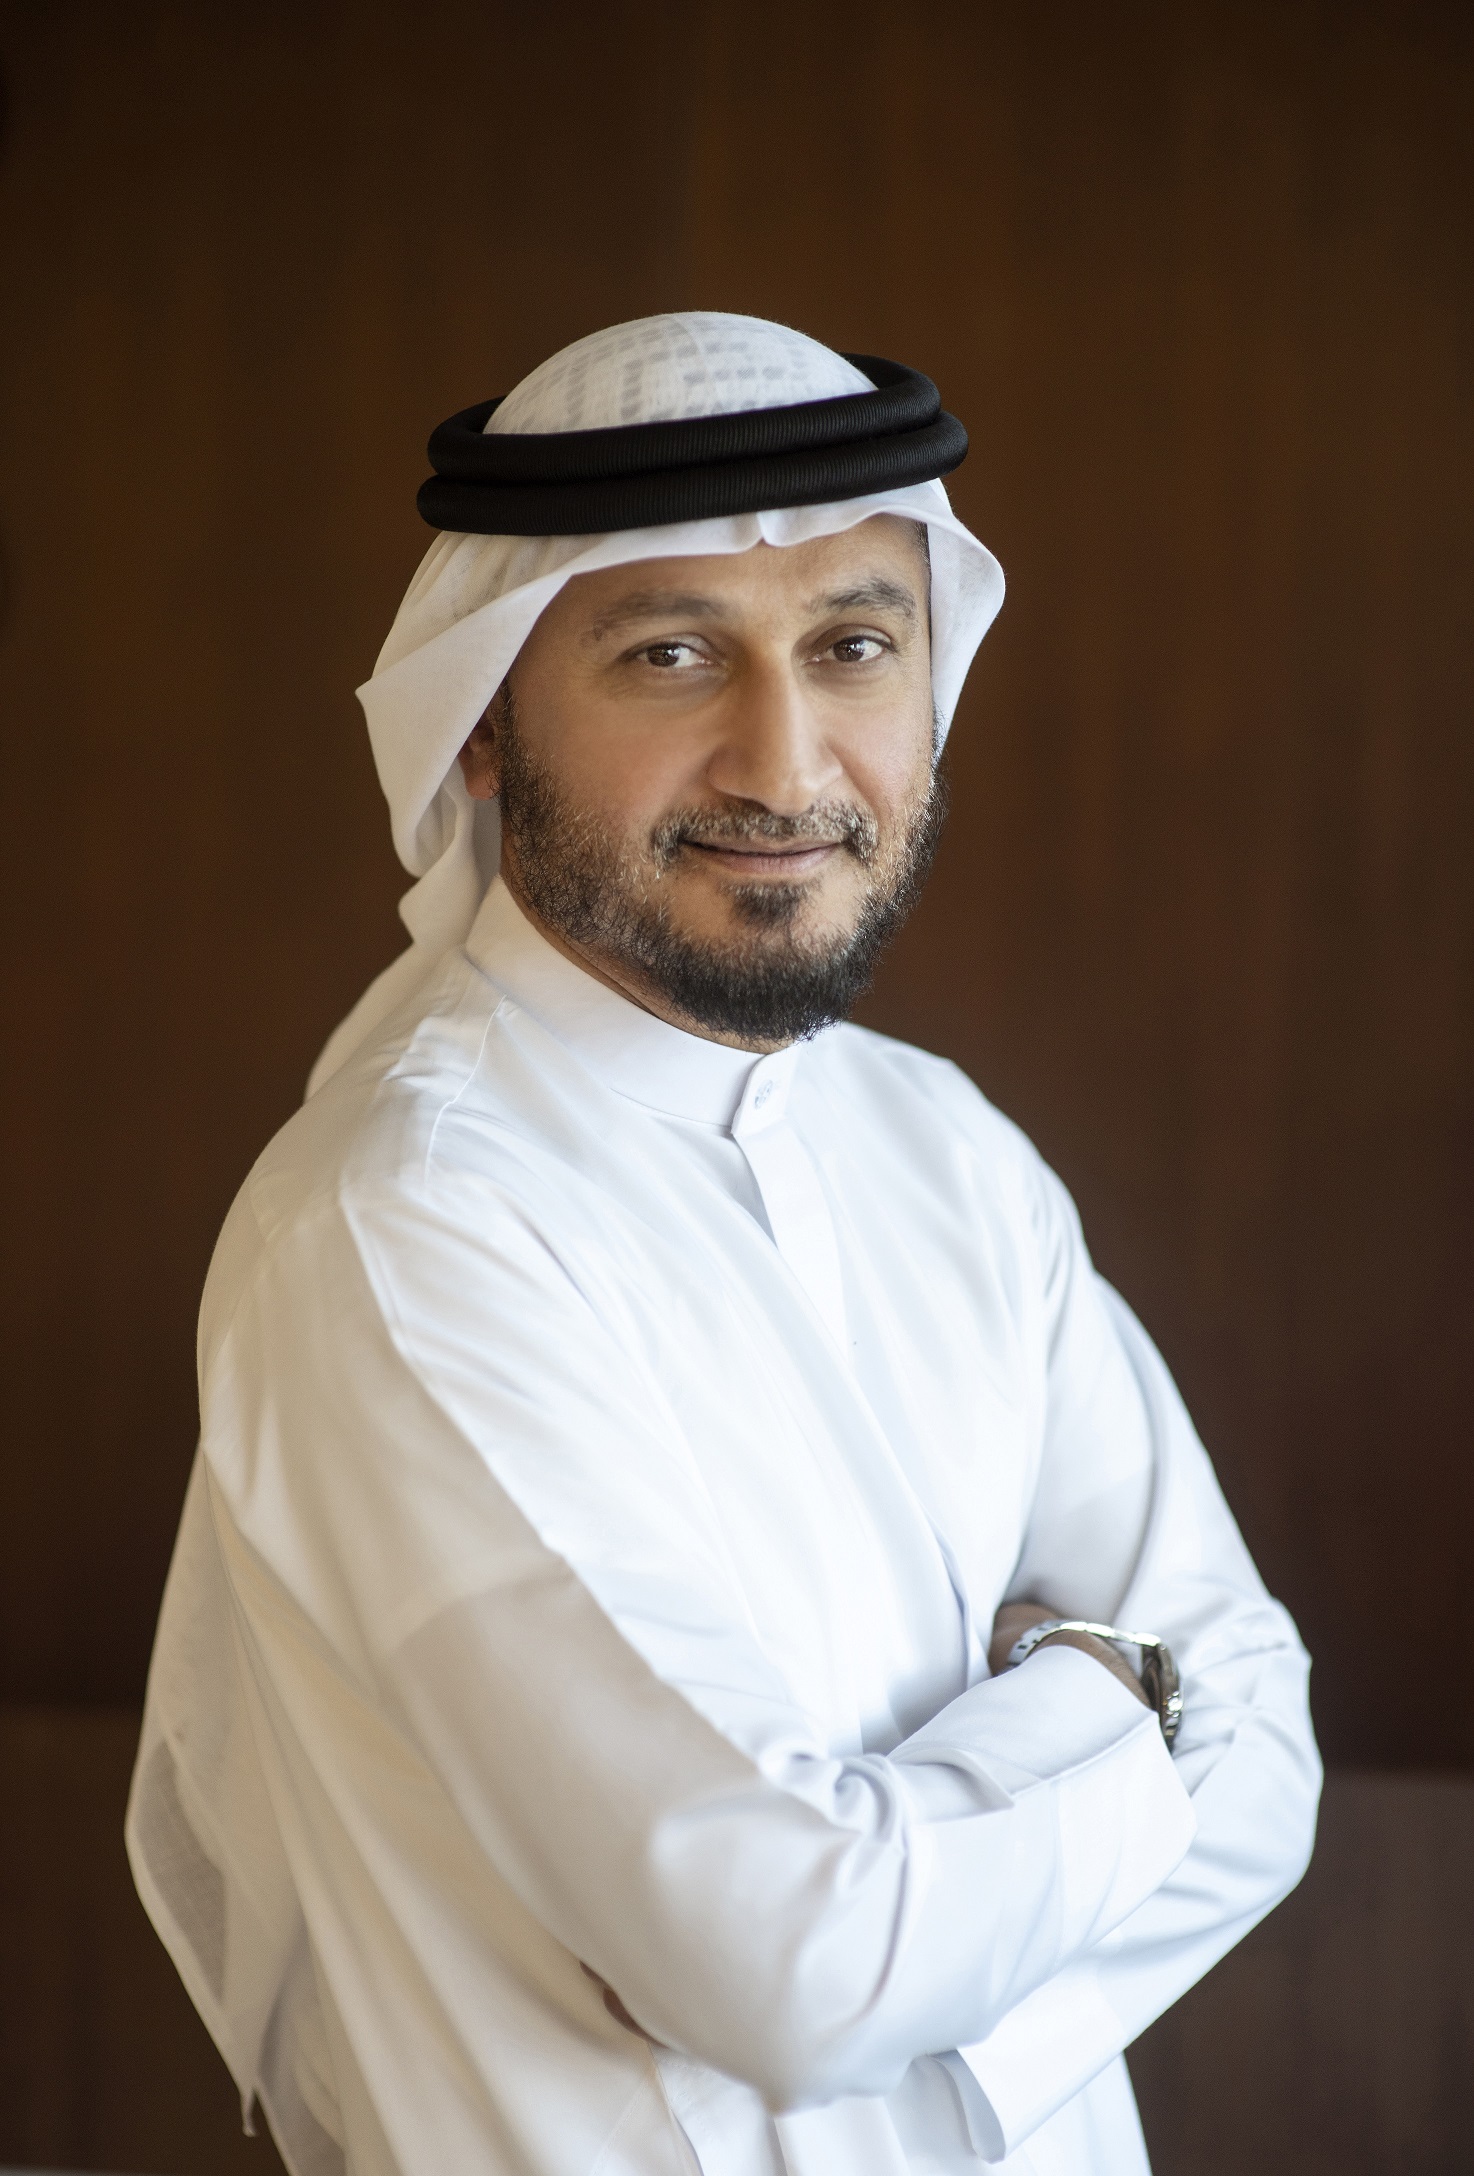 du Set To Host Third Annual Edition Of GCF 5G MENA Conference